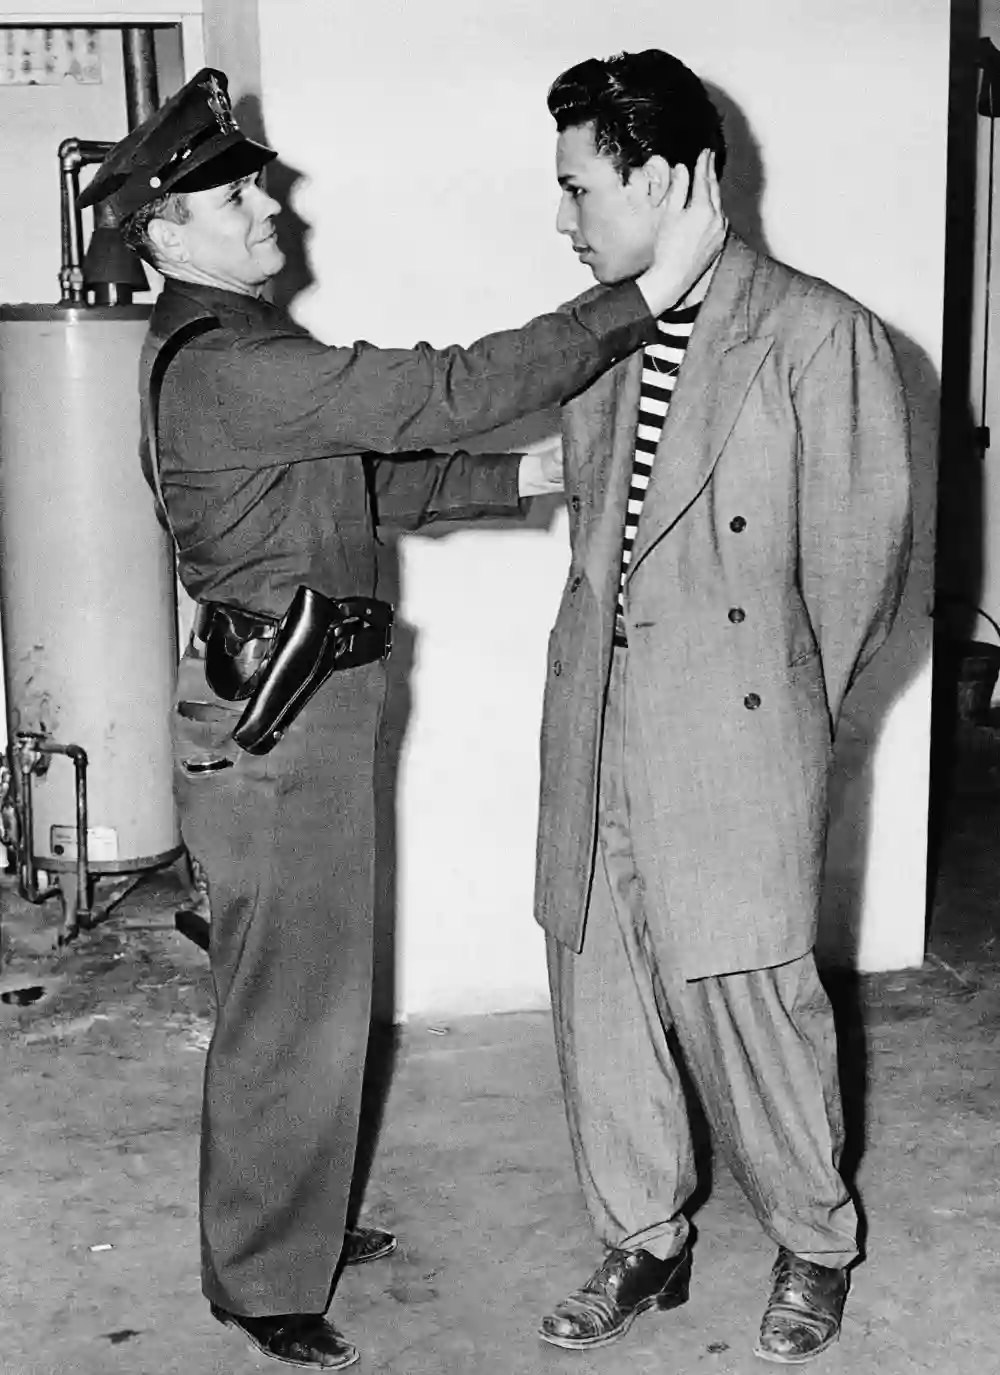 A man in a zoot suit is inspected upon arrest by LAPD on June 7, 1943.